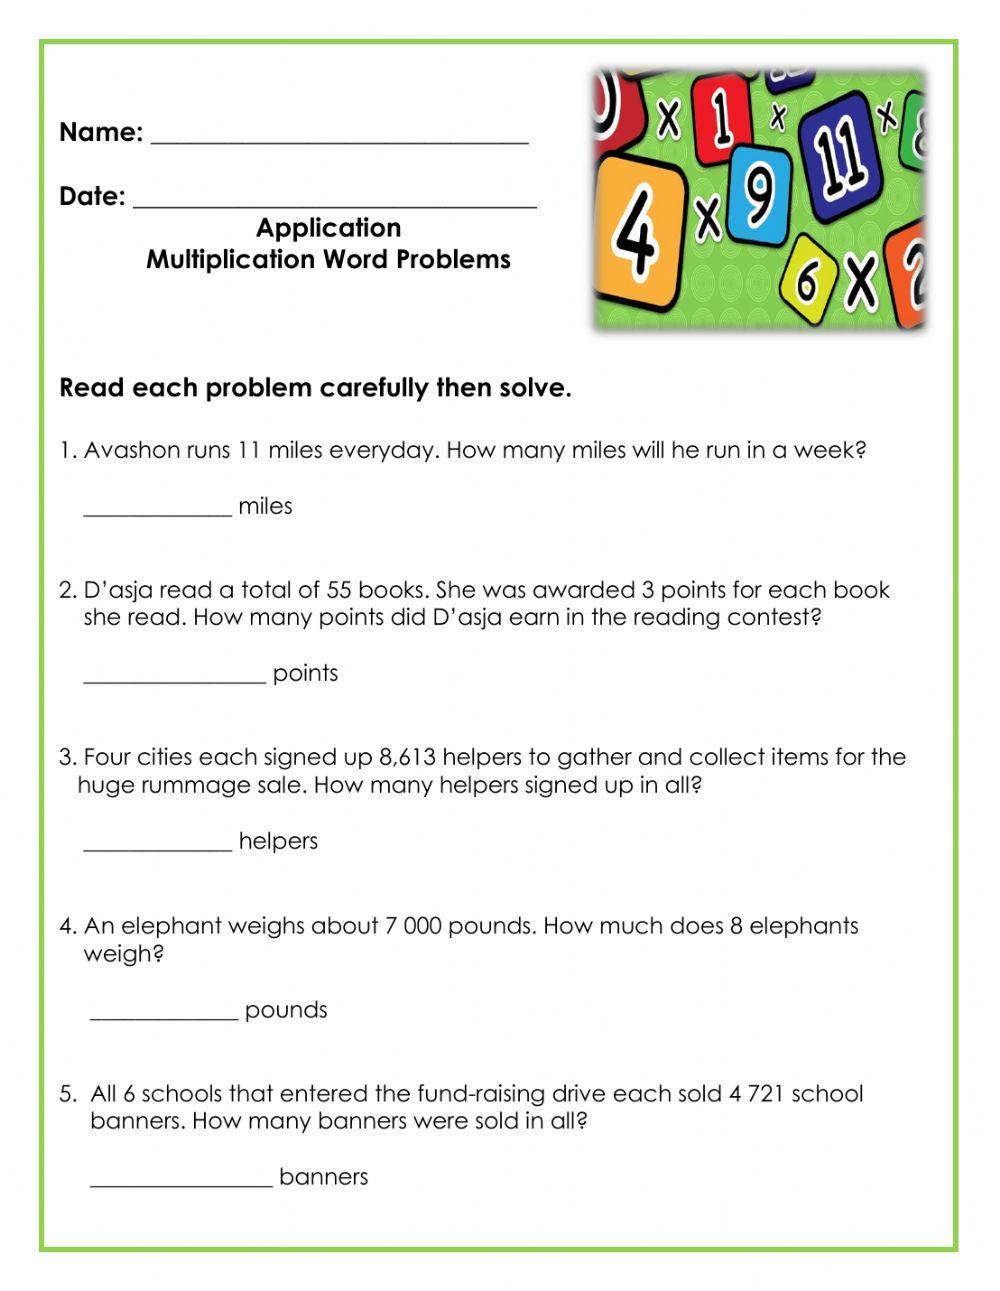 Application-Multiplication Word Problems